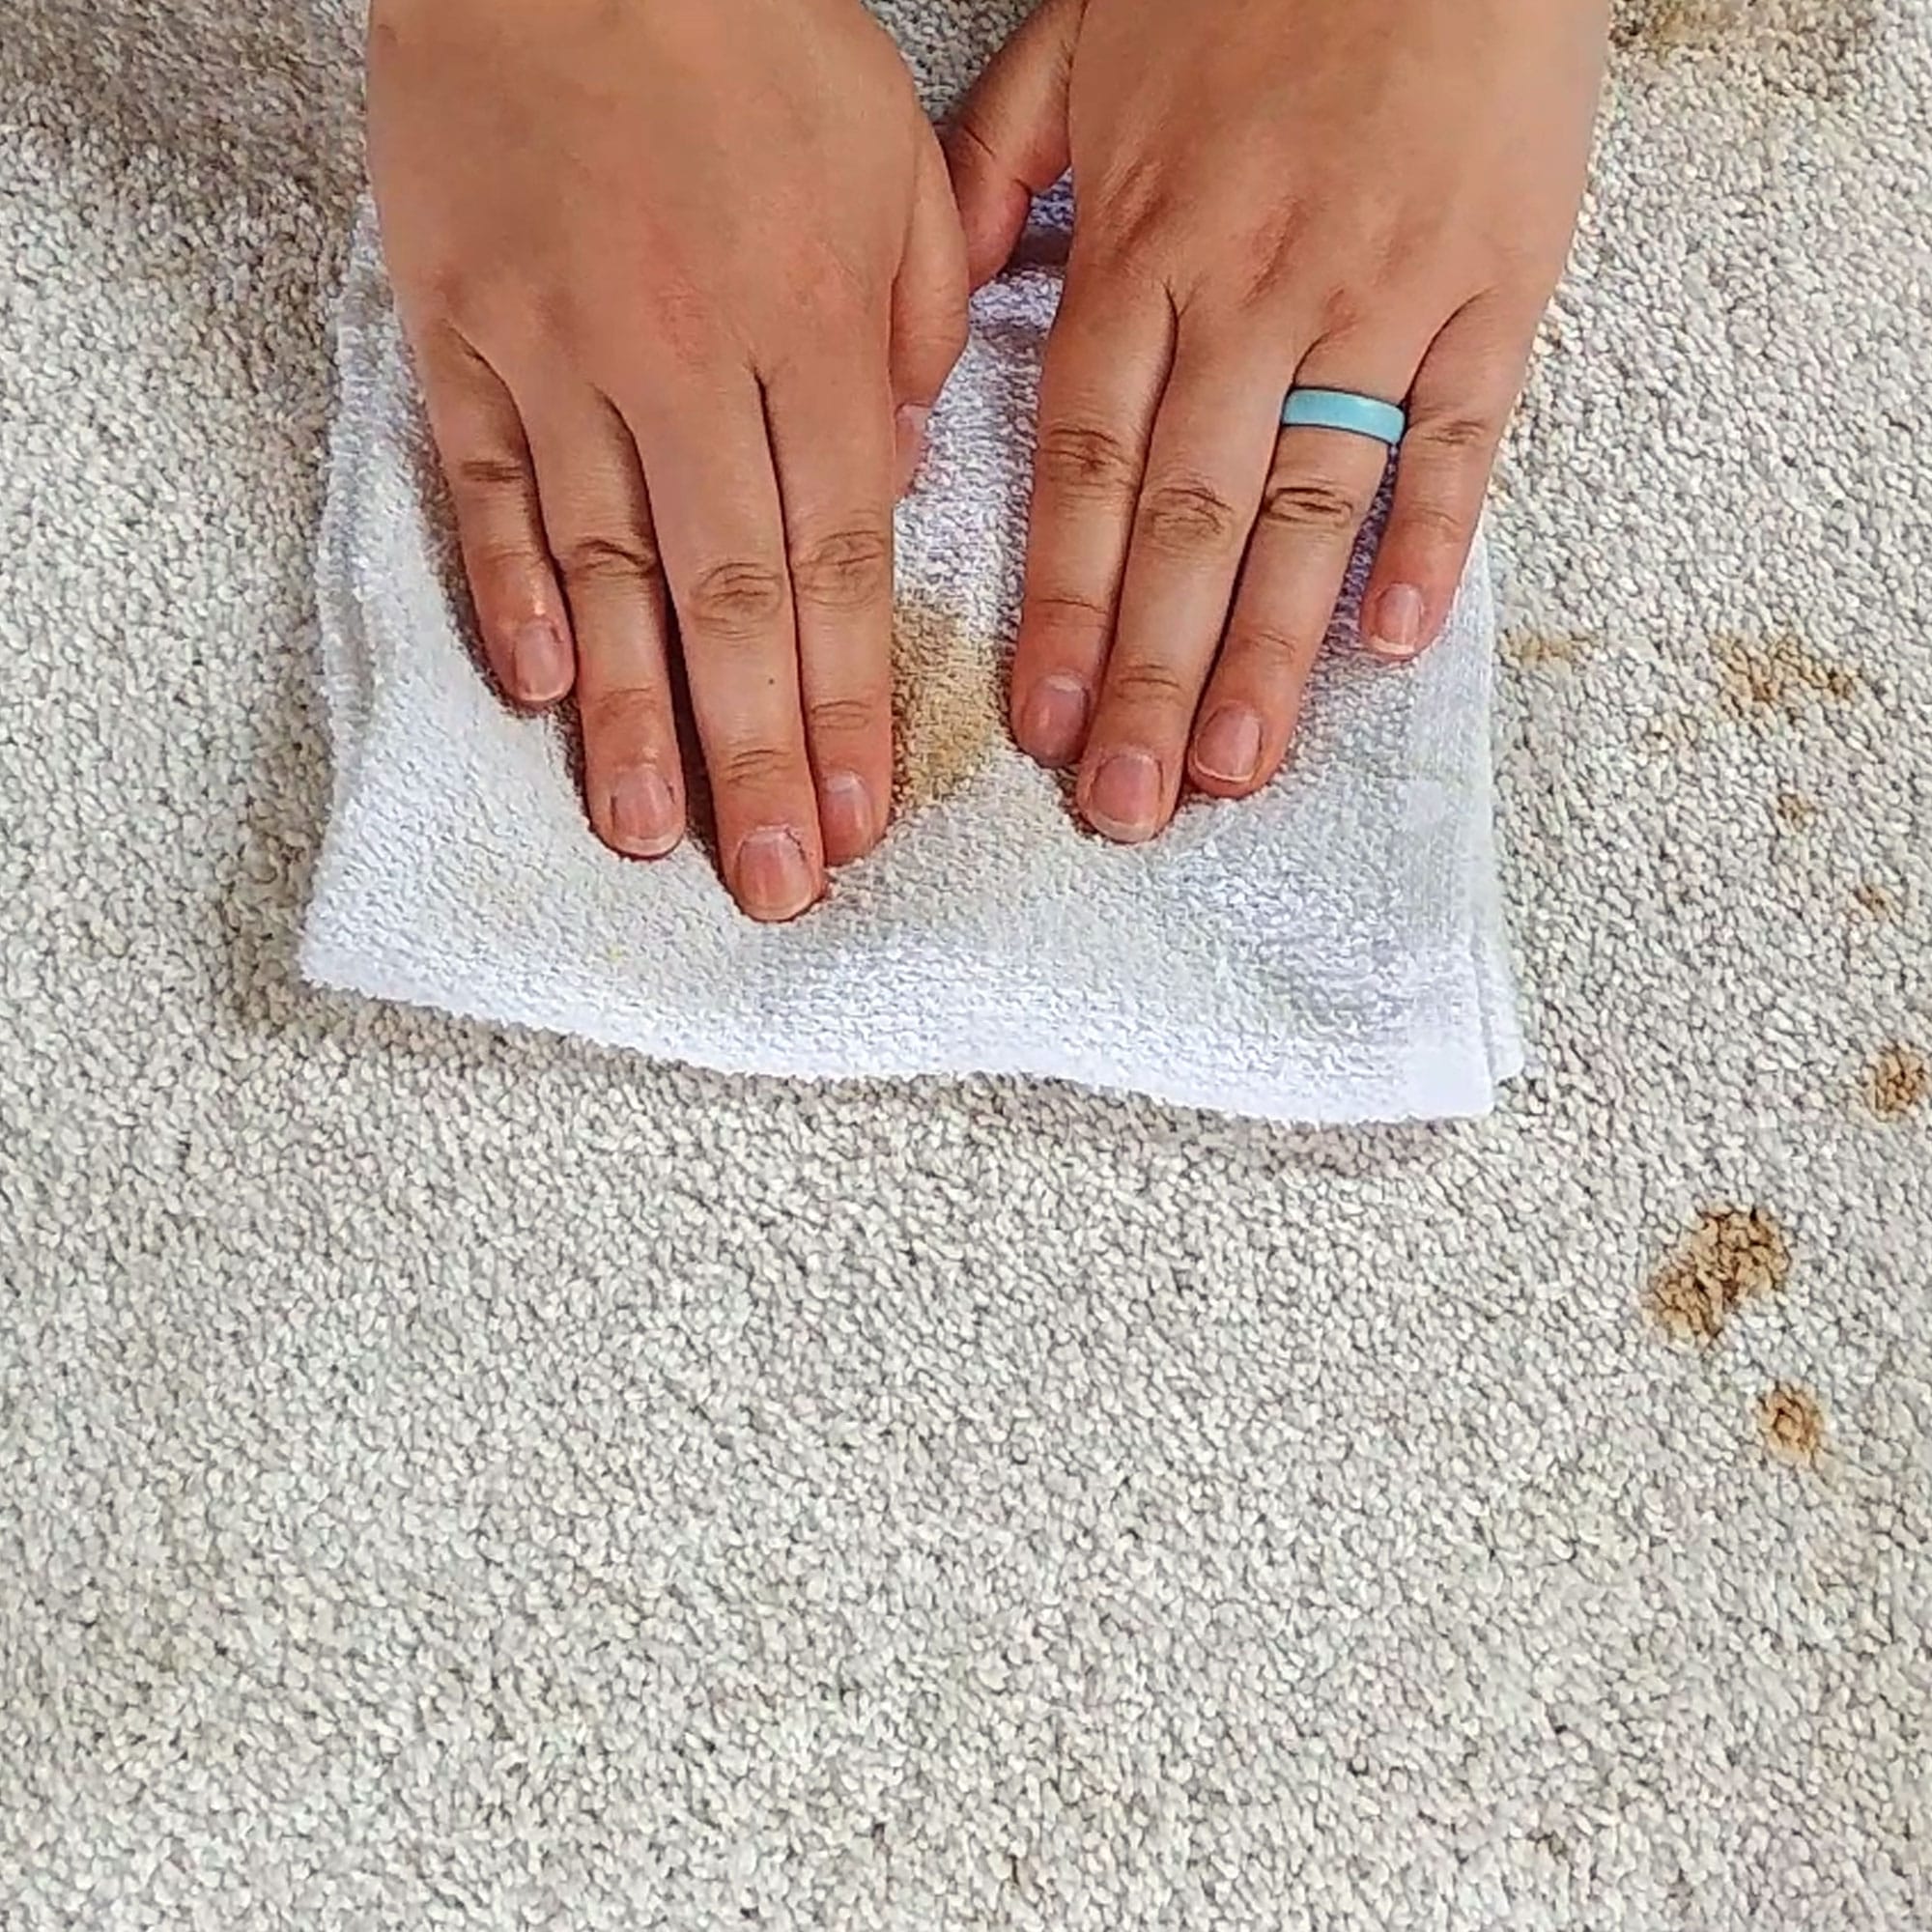 Blotting coffee with white towel